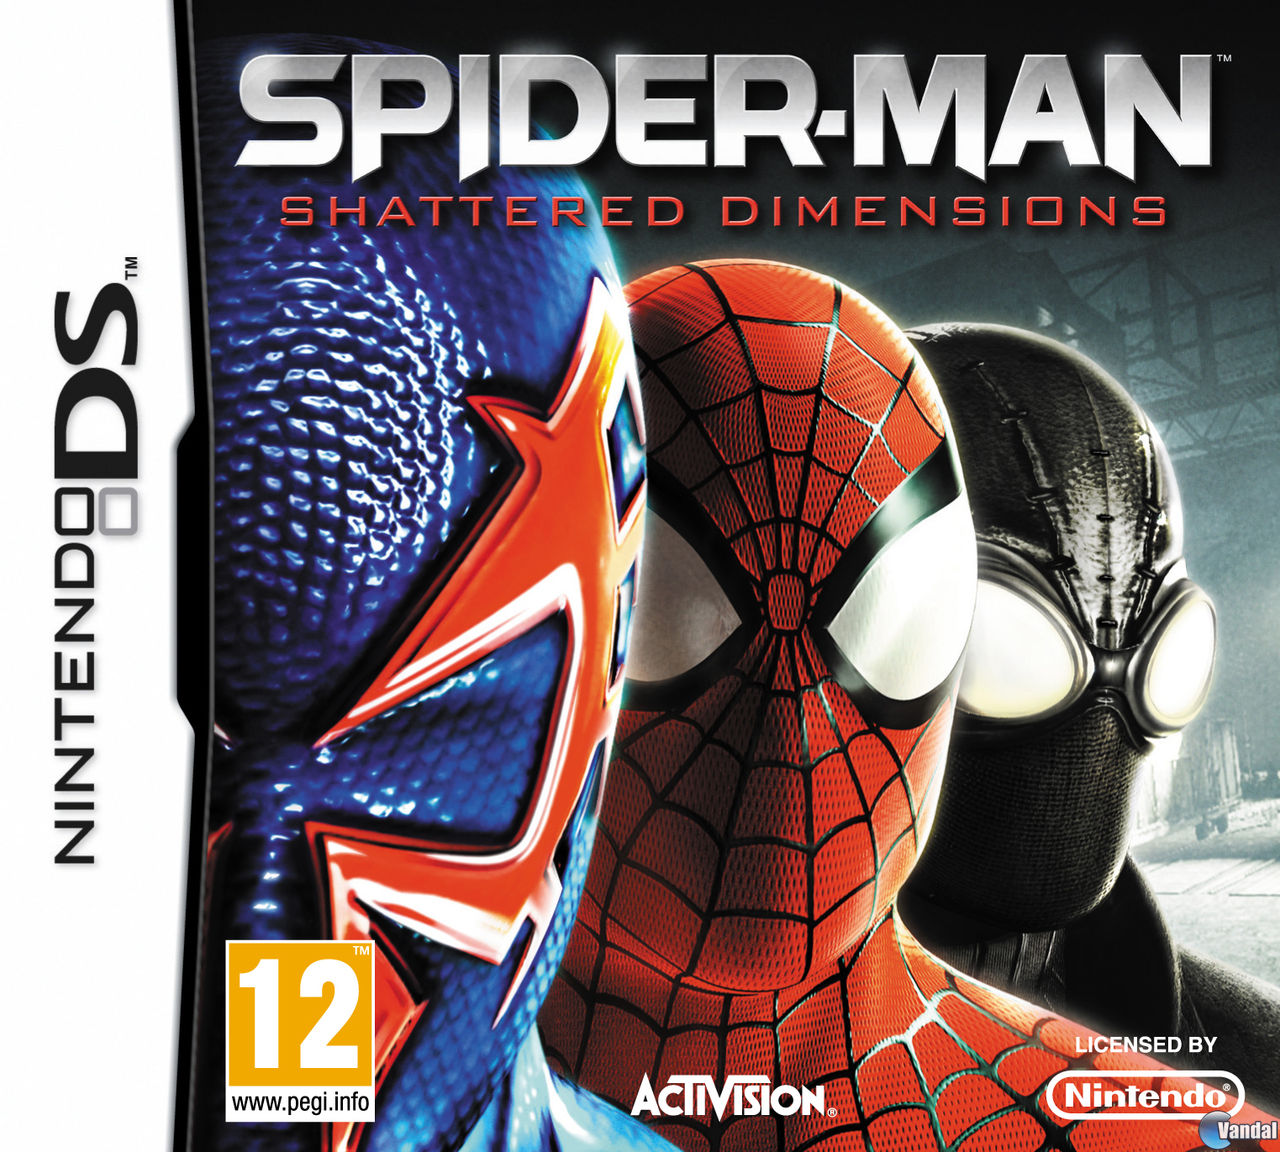 spider-man-shattered-dimensions-videojuego-pc-ps3-xbox-360-wii-nds-y-psp-vandal